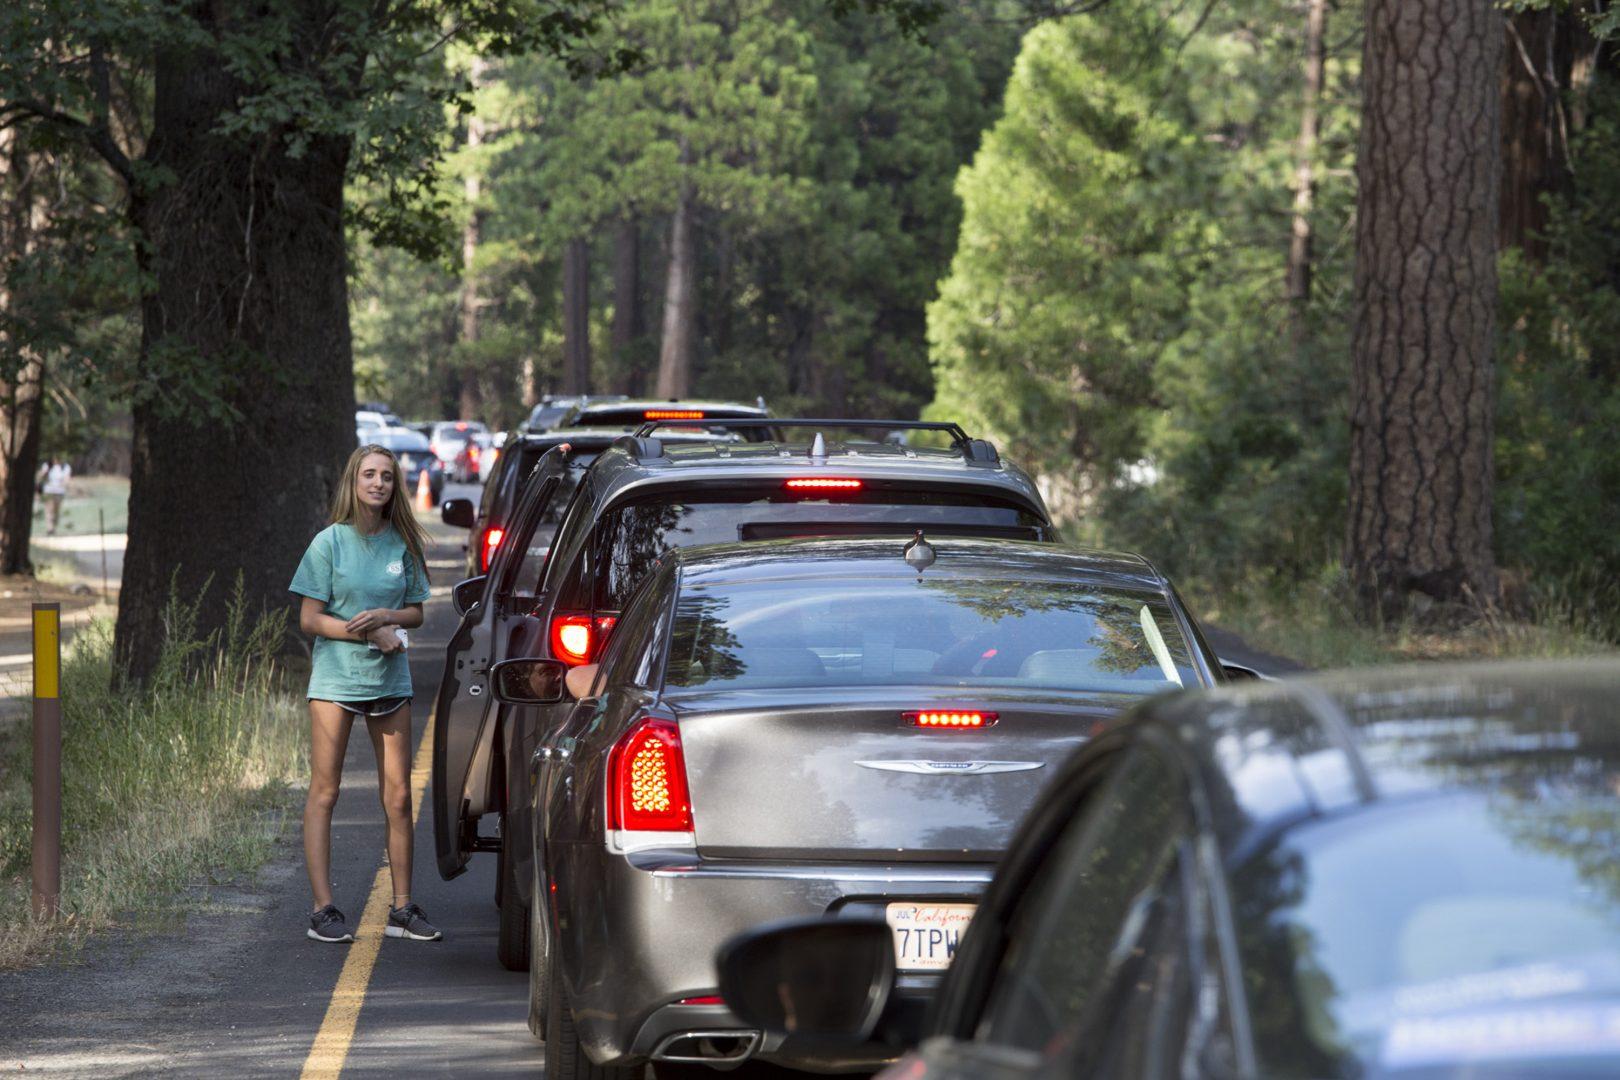 Traffic is at a standstill and visitors are out of their cars on the valley floor while a bus lane is empty and off-limits to visitors at Yosemite National Park July 15 2017. (Brian vander Brug/Los Angeles Times/TNS)